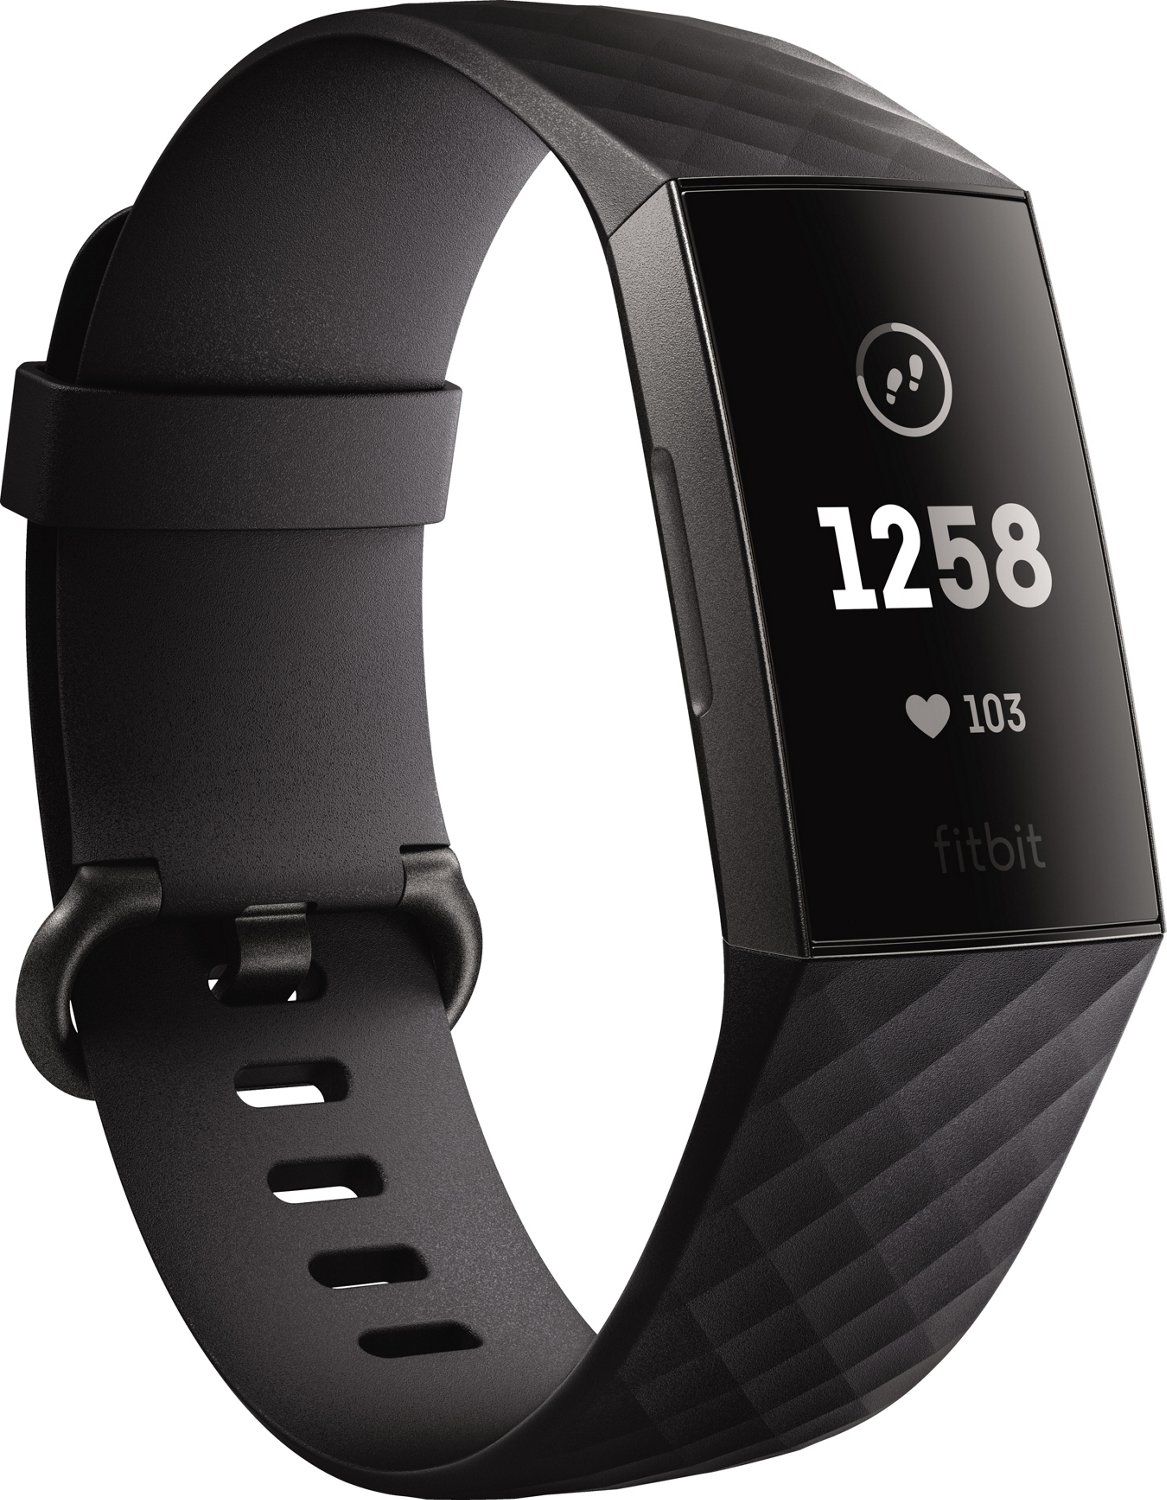 Fitbit - Up to 30% Off | Academy